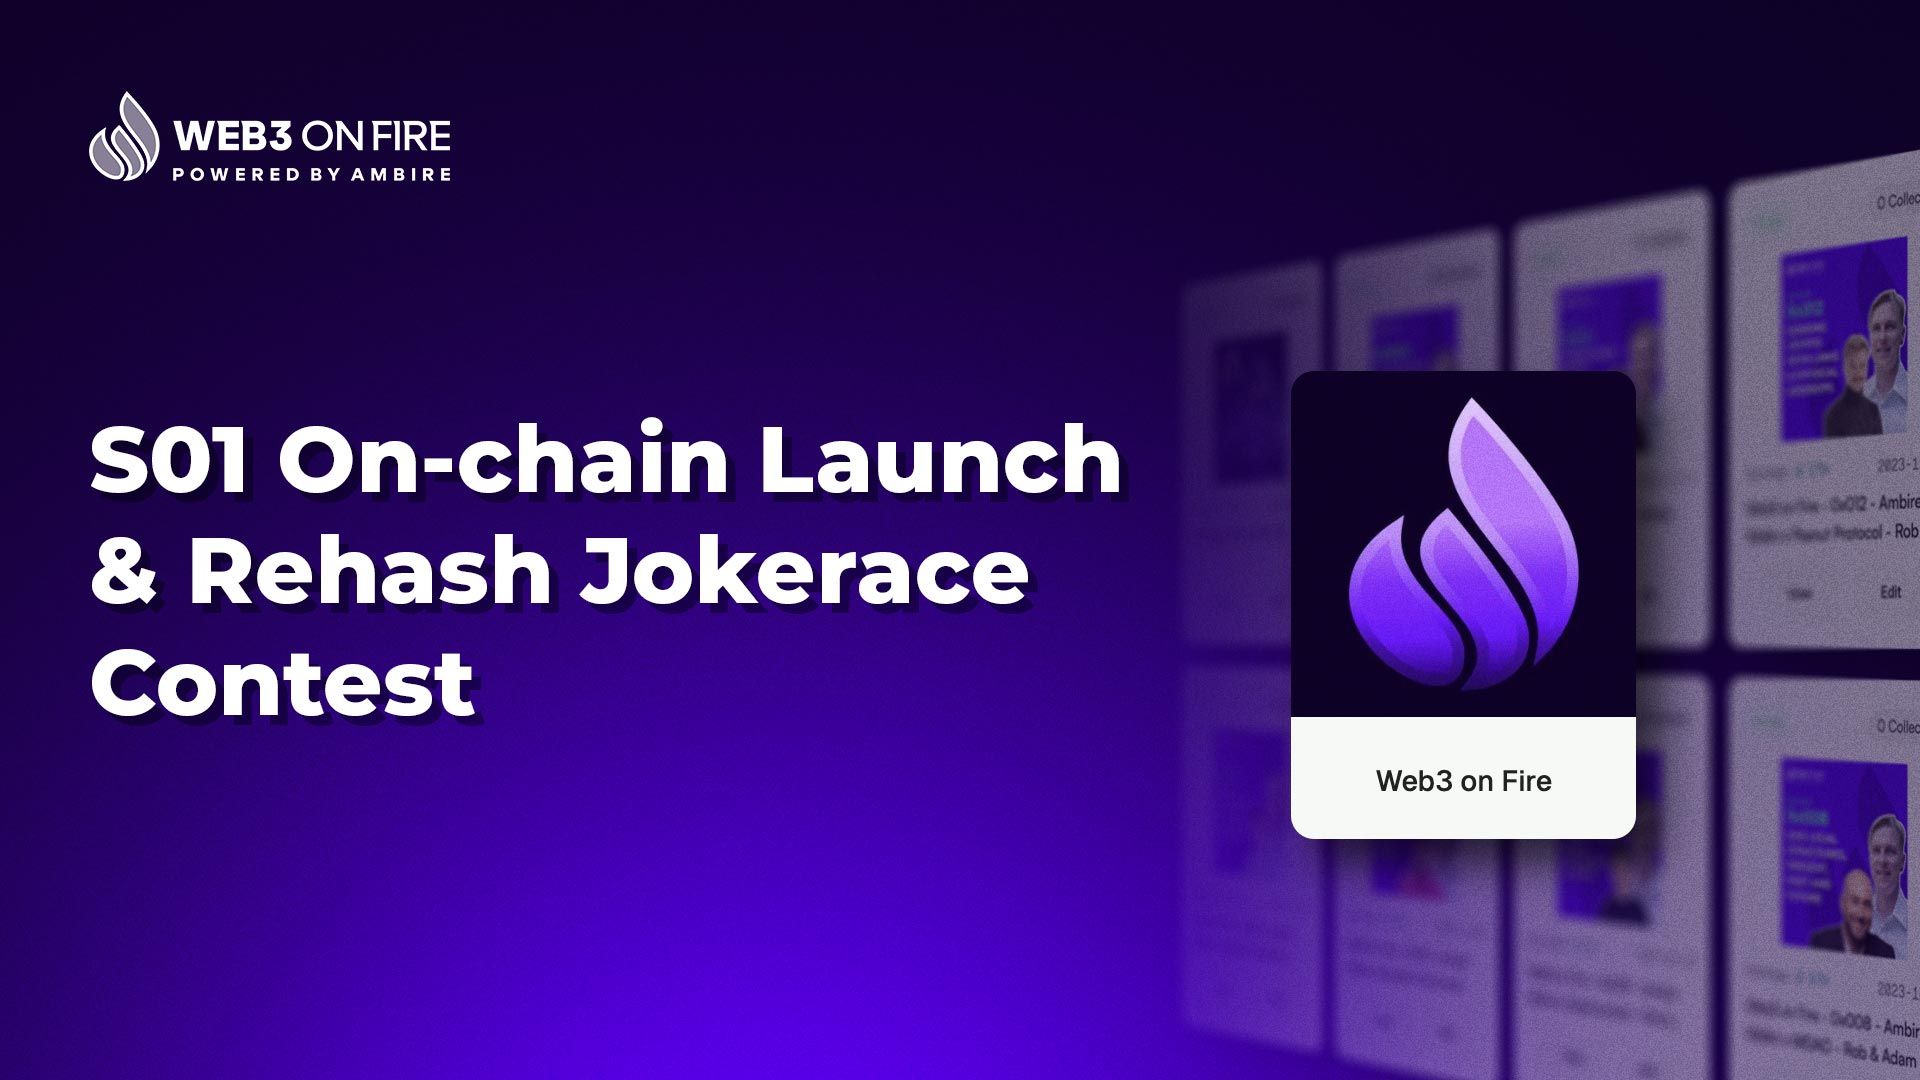 Web3 on Fire S01 On-chain Launch & Rehash JokeRace Contest